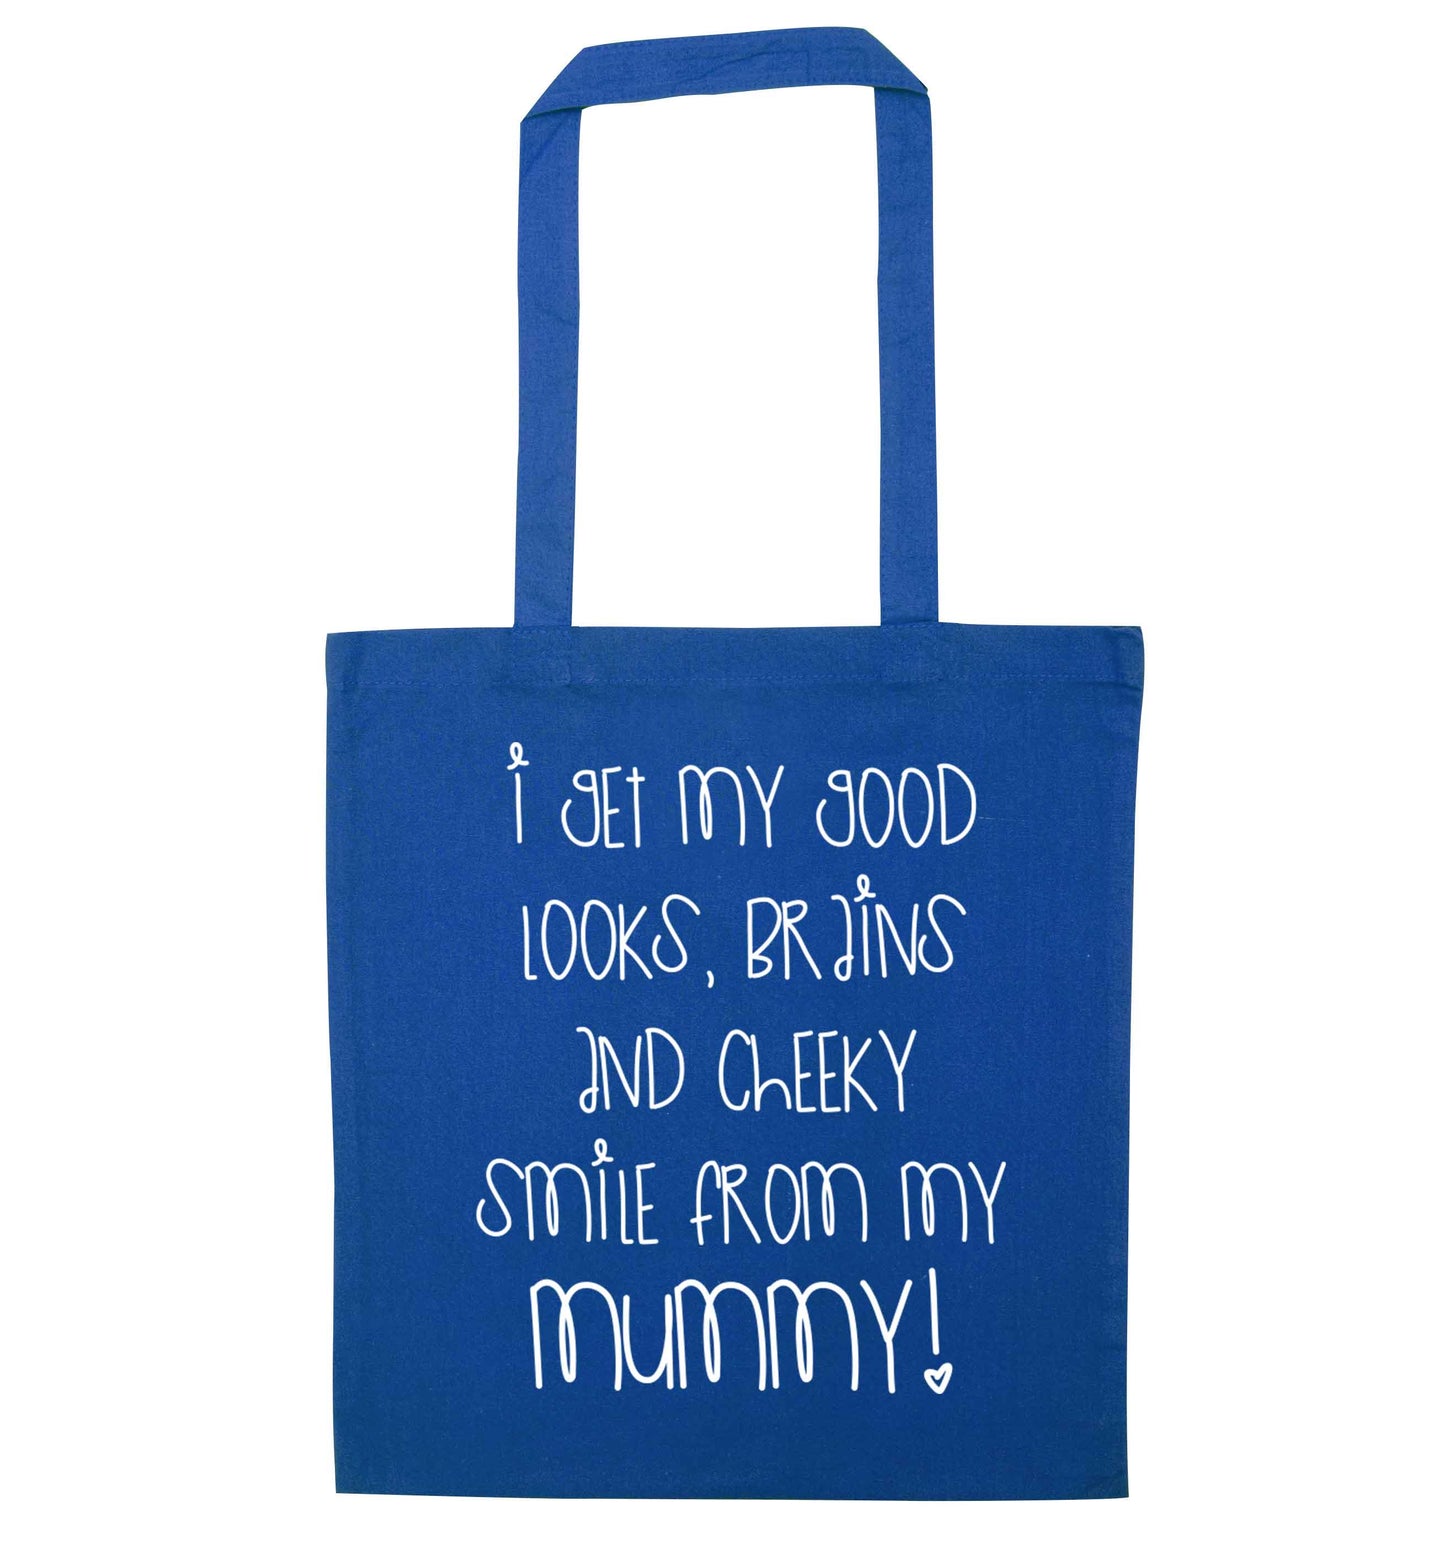 I get my good looks, brains and cheeky smile from my mummy blue tote bag